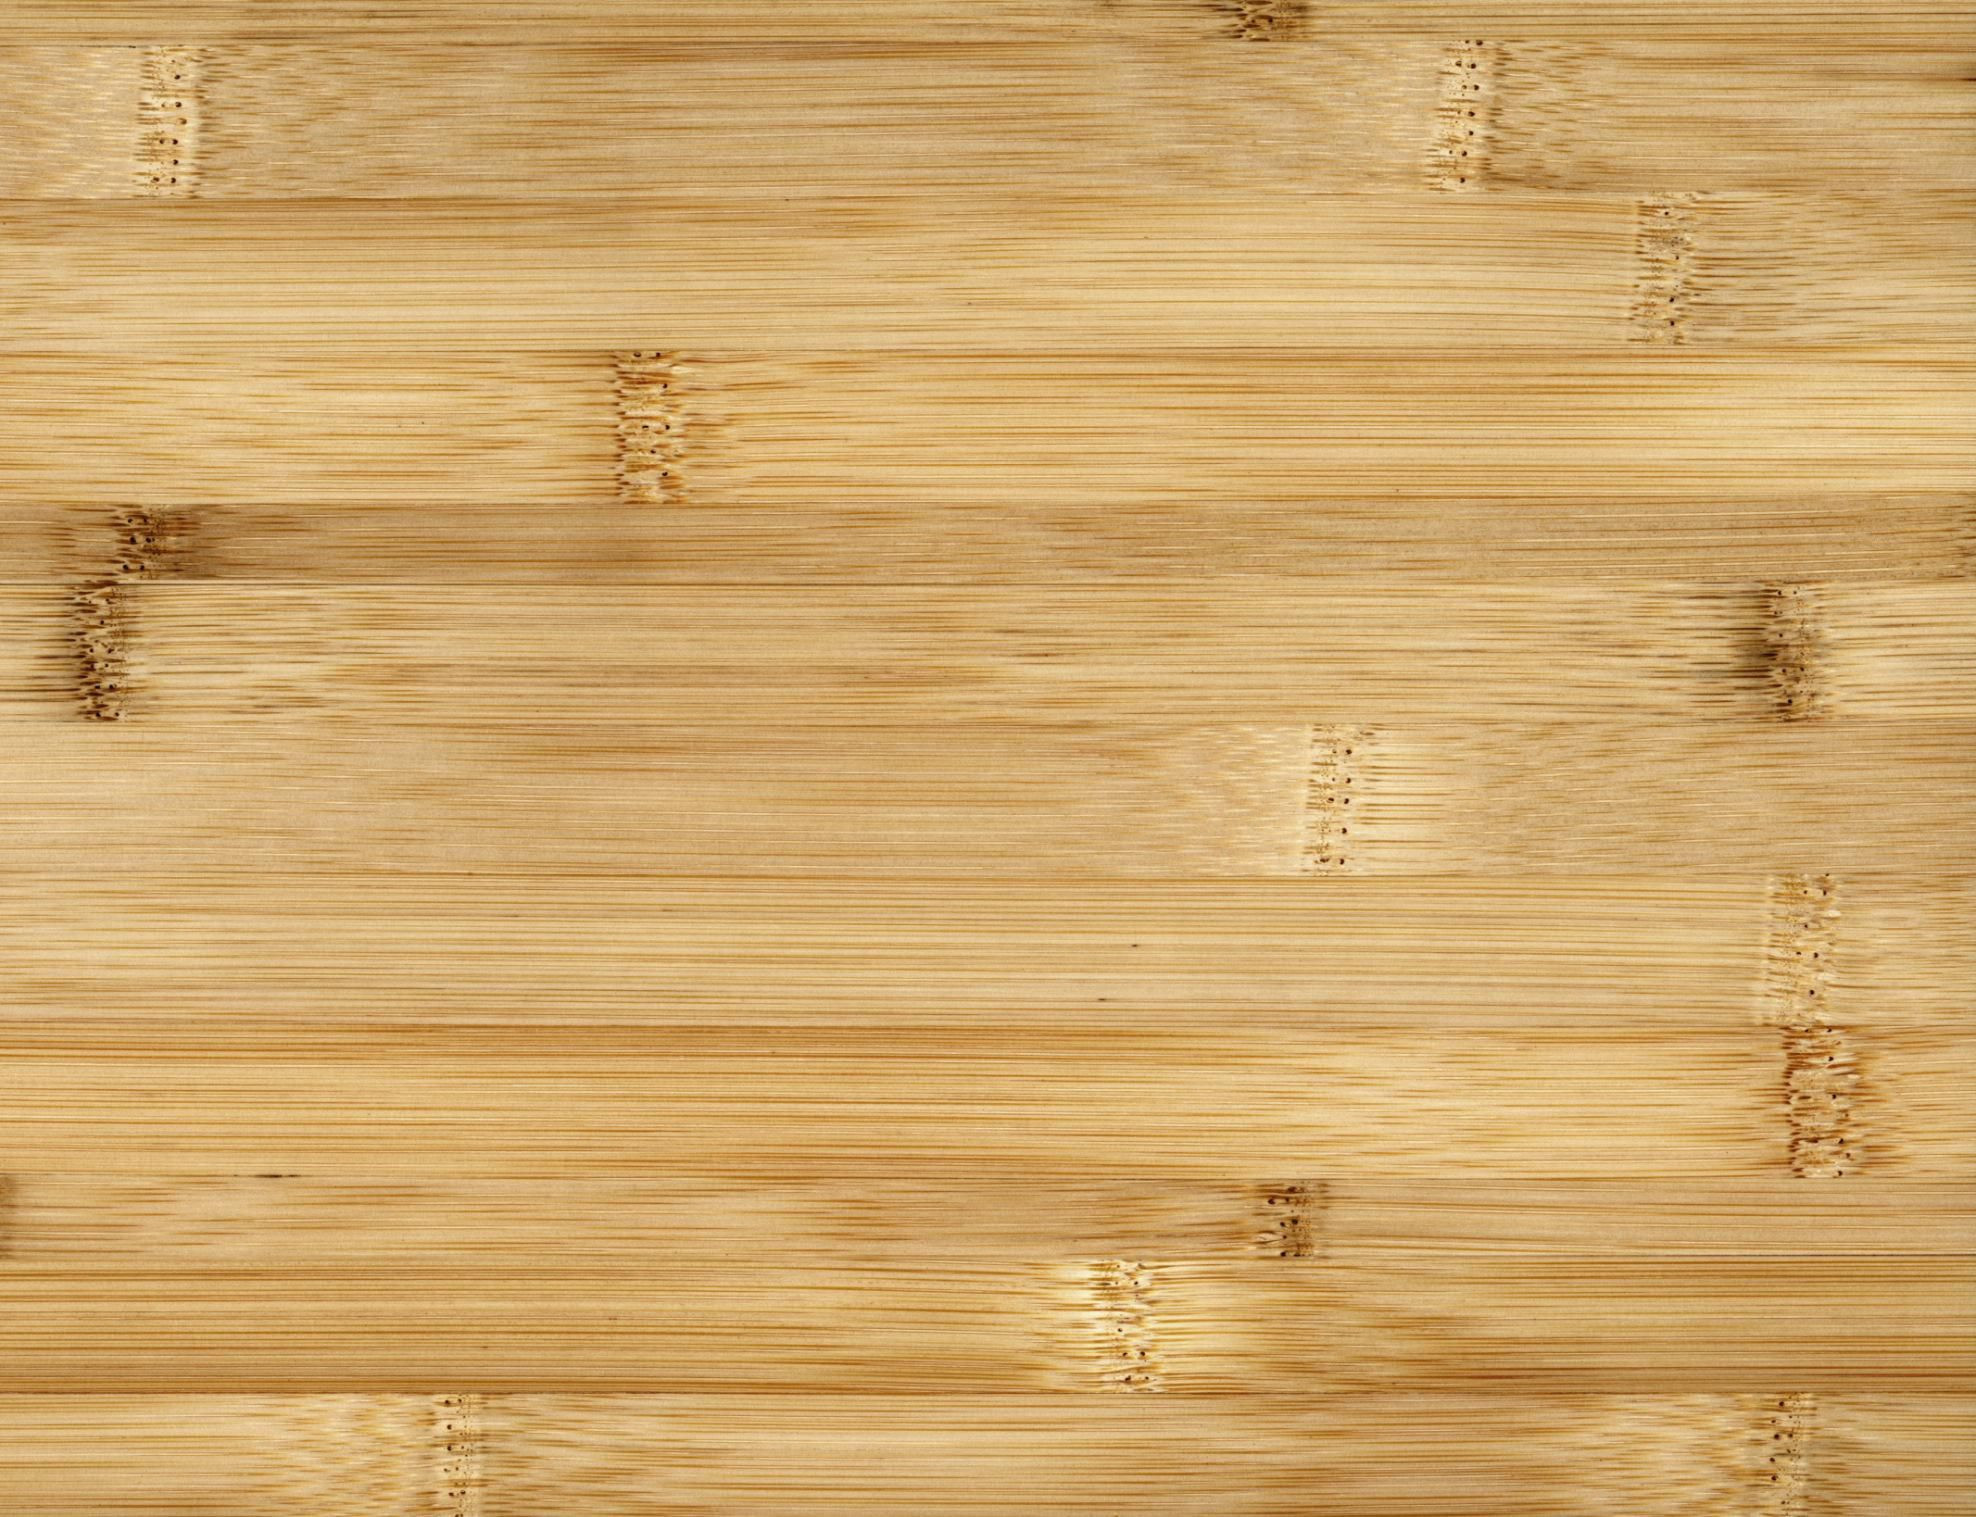 21 Famous Hardwood Floor Cleaning Companies 2024 free download hardwood floor cleaning companies of how to clean bamboo flooring throughout 200266305 001 56a2fd815f9b58b7d0d000cd